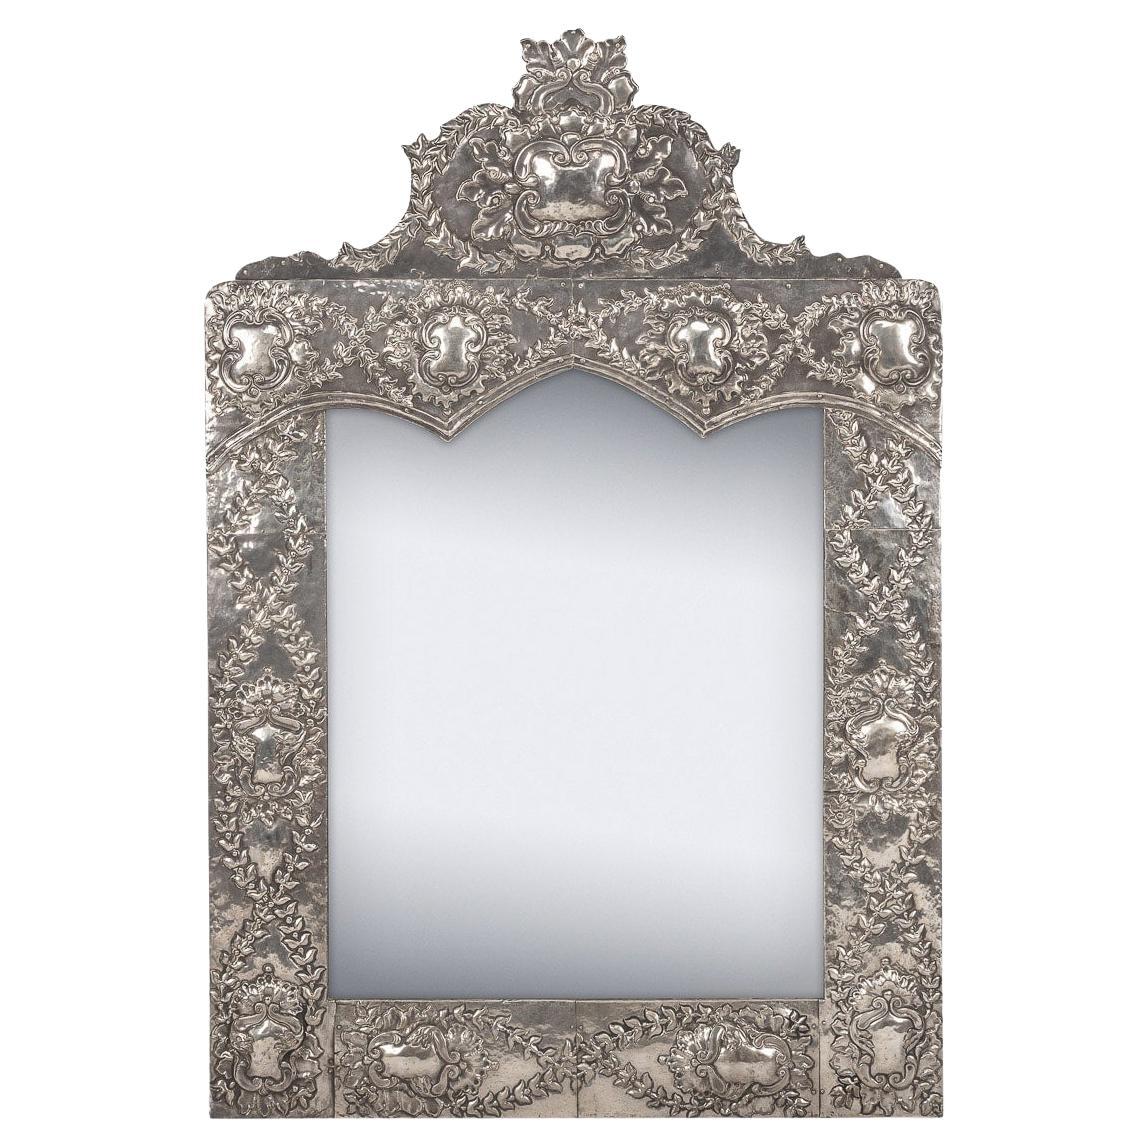 20th Century Continental Solid Silver Wall Mirror, c.1900 For Sale